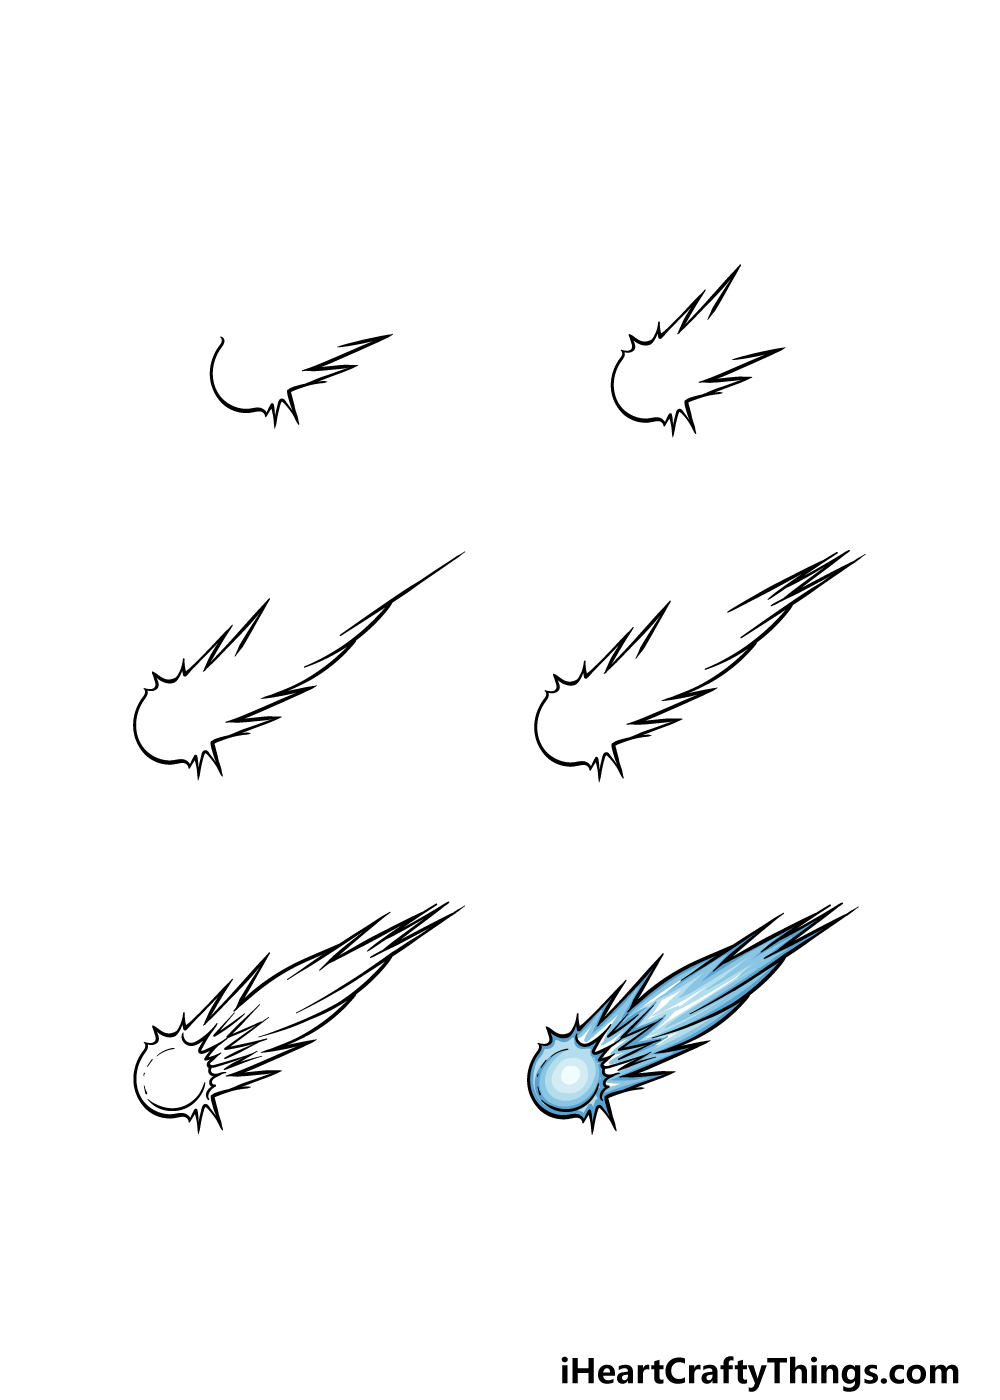 how to draw a comet in 6 steps